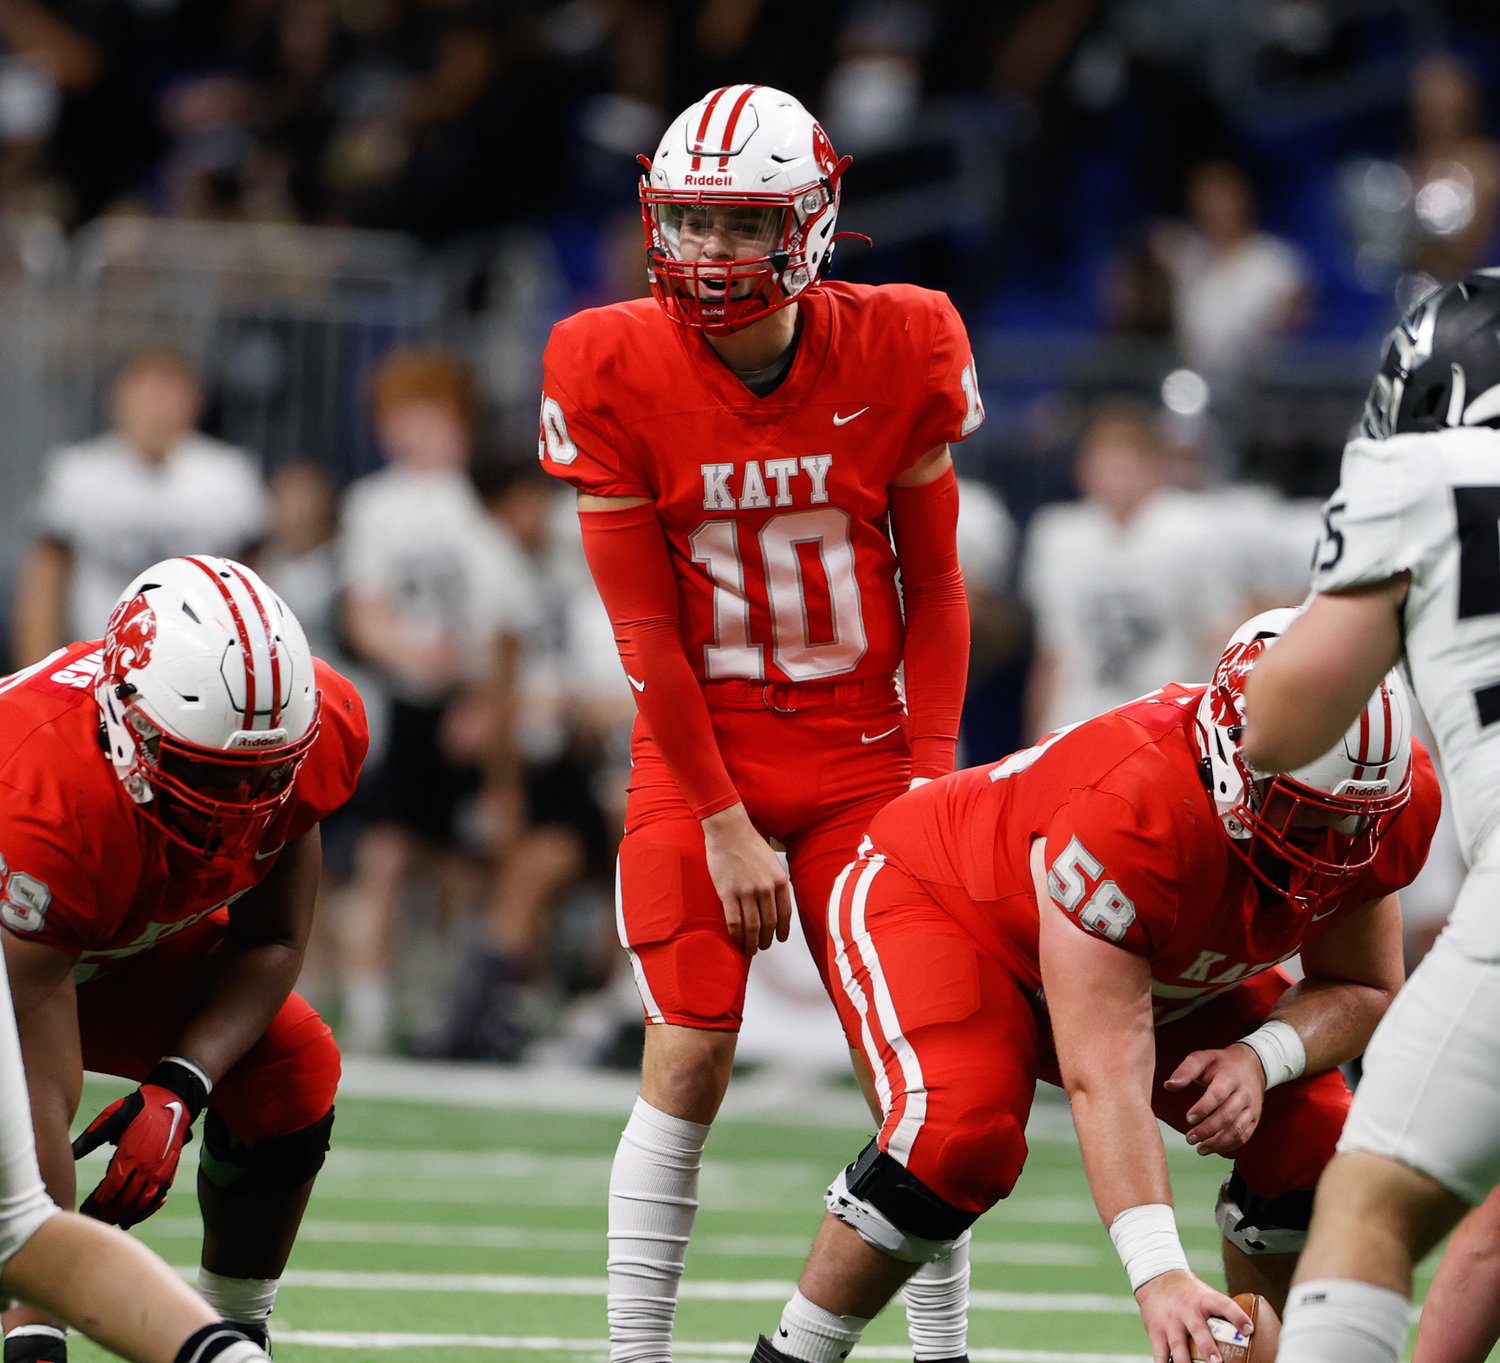 Katy quarterback Caleb Koger (10) during the Class 6A-DII state semifinal football game between Katy and Vandegrift on Dec. 10, 2022 in San Antonio.